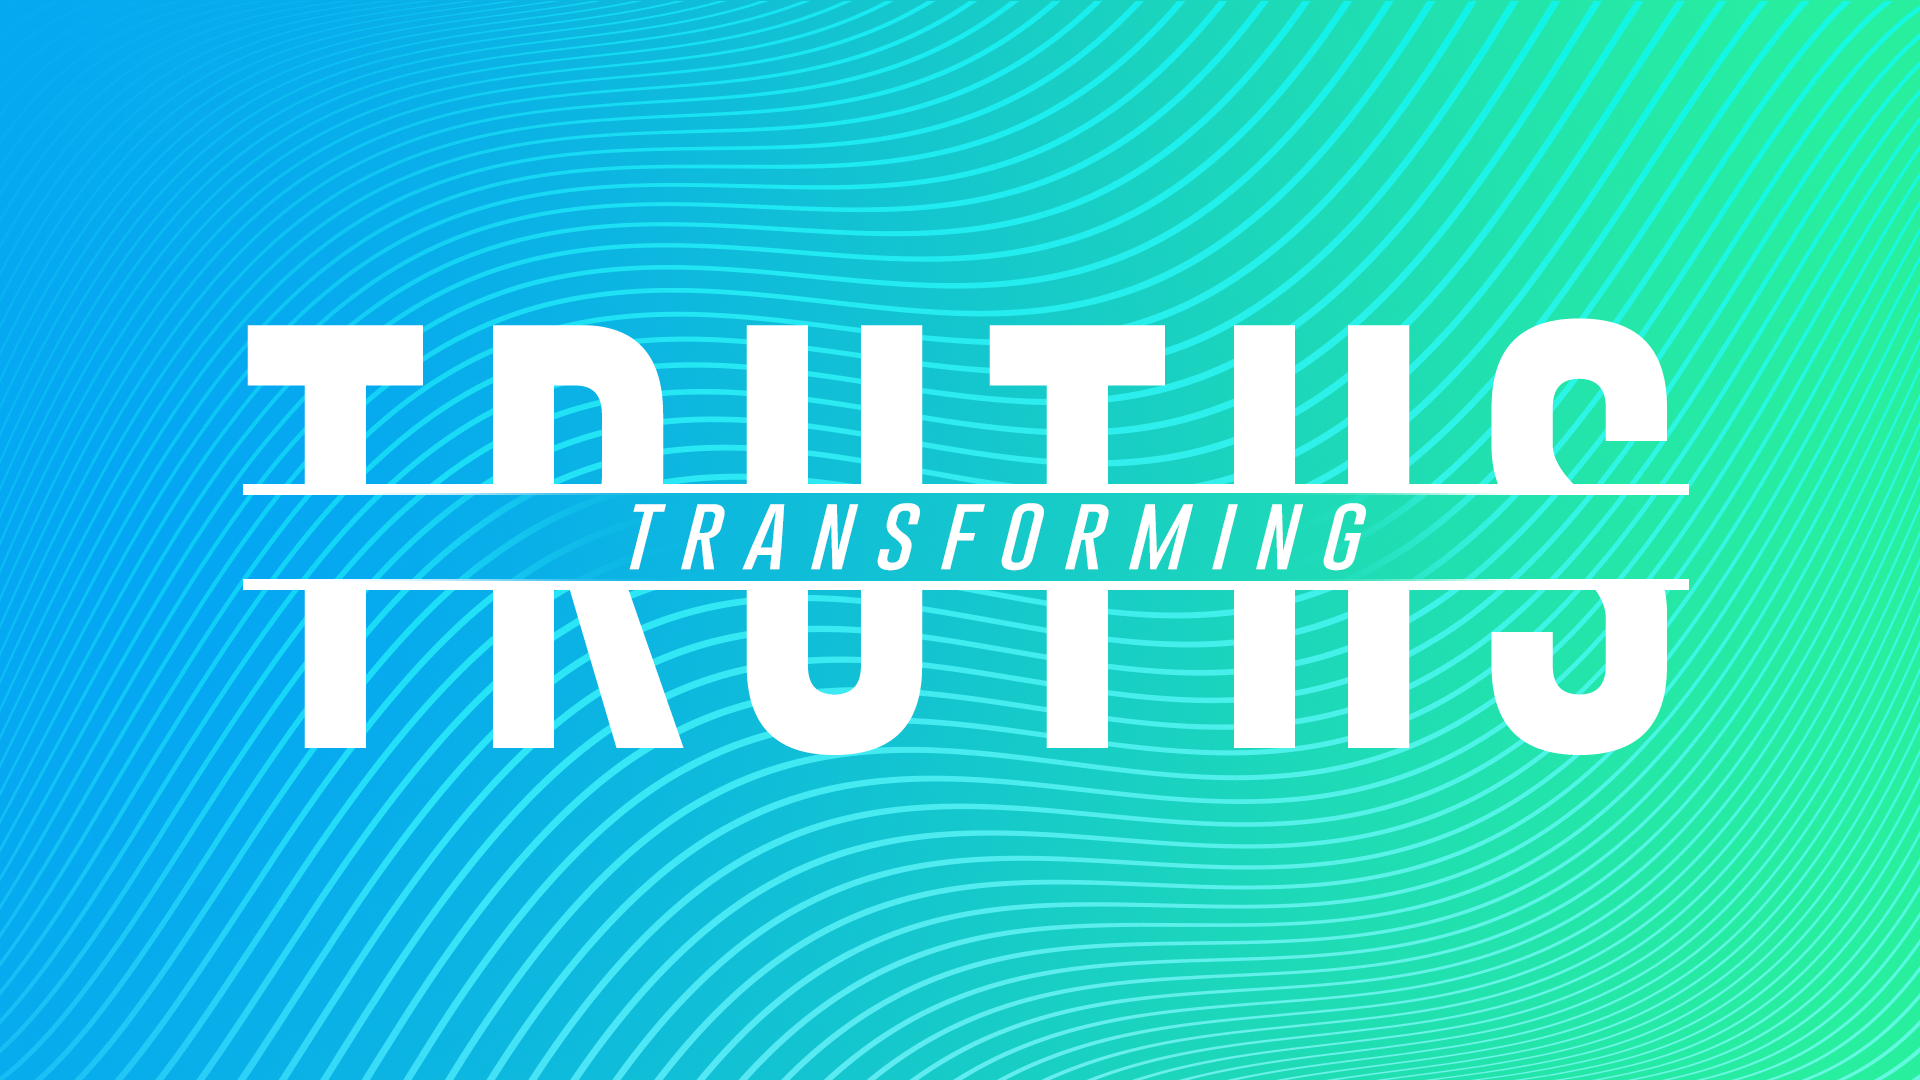 July 26, 2020 – Transforming Truths